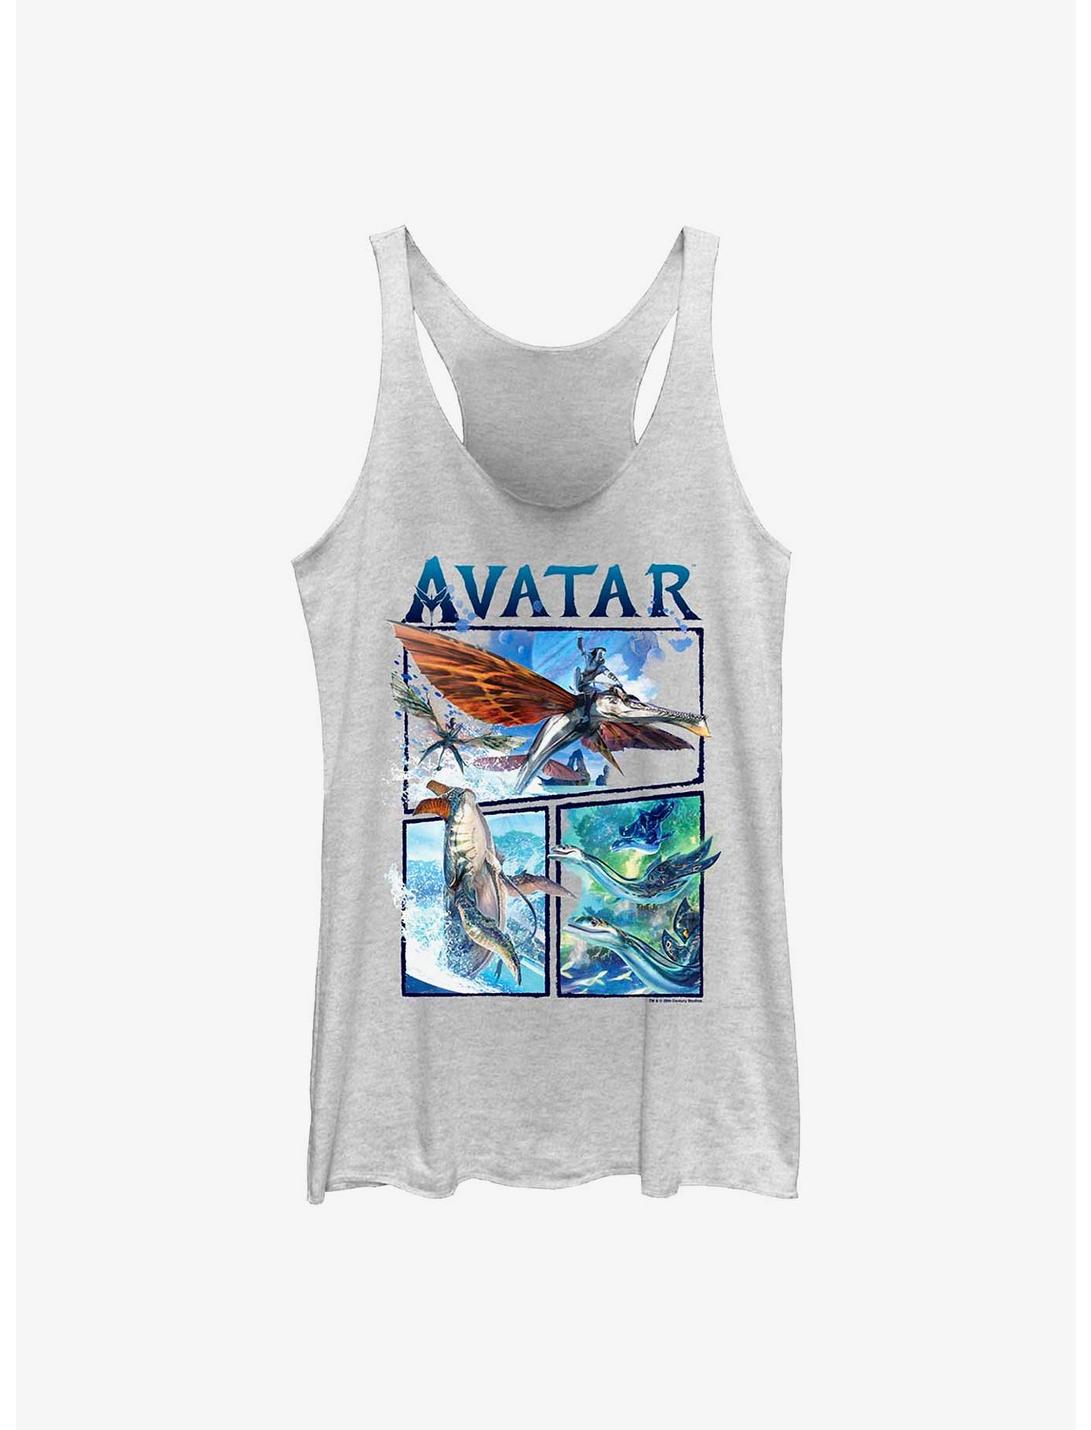 Avatar: The Way of Water Air and Sea Girls Tank, WHITE HTR, hi-res